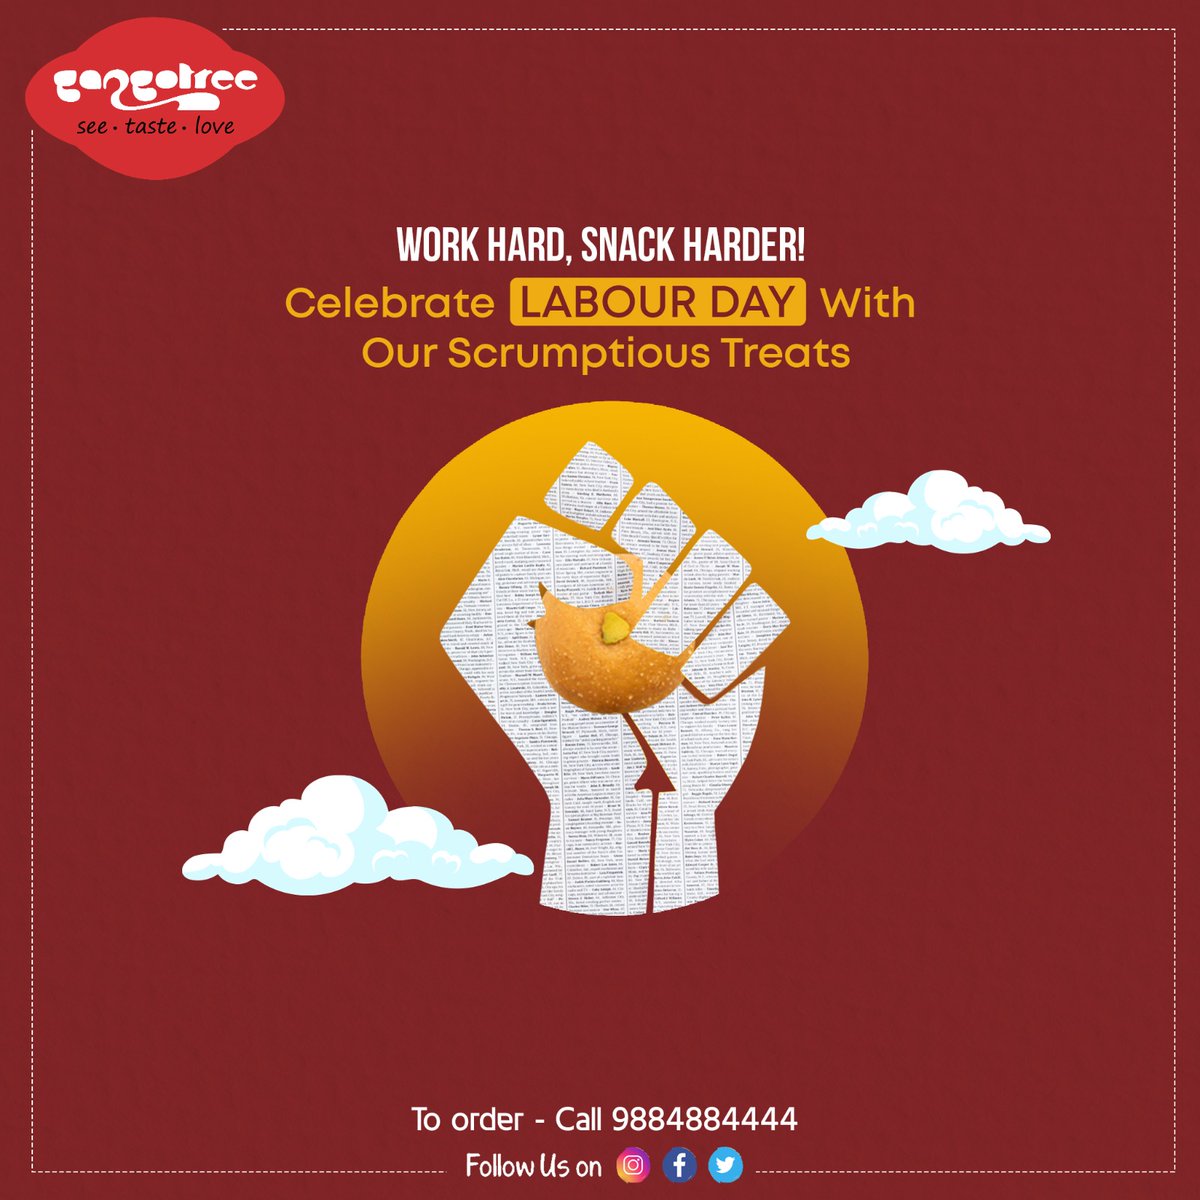 Wishing all the hardworking folks out there a sweet & savoury Labour Day. Share the love and order our treats for your friends and colleagues.

#gangotreesweets #gangotree #internationallabourday #labourday #labourday2023 #internationallabourday2023